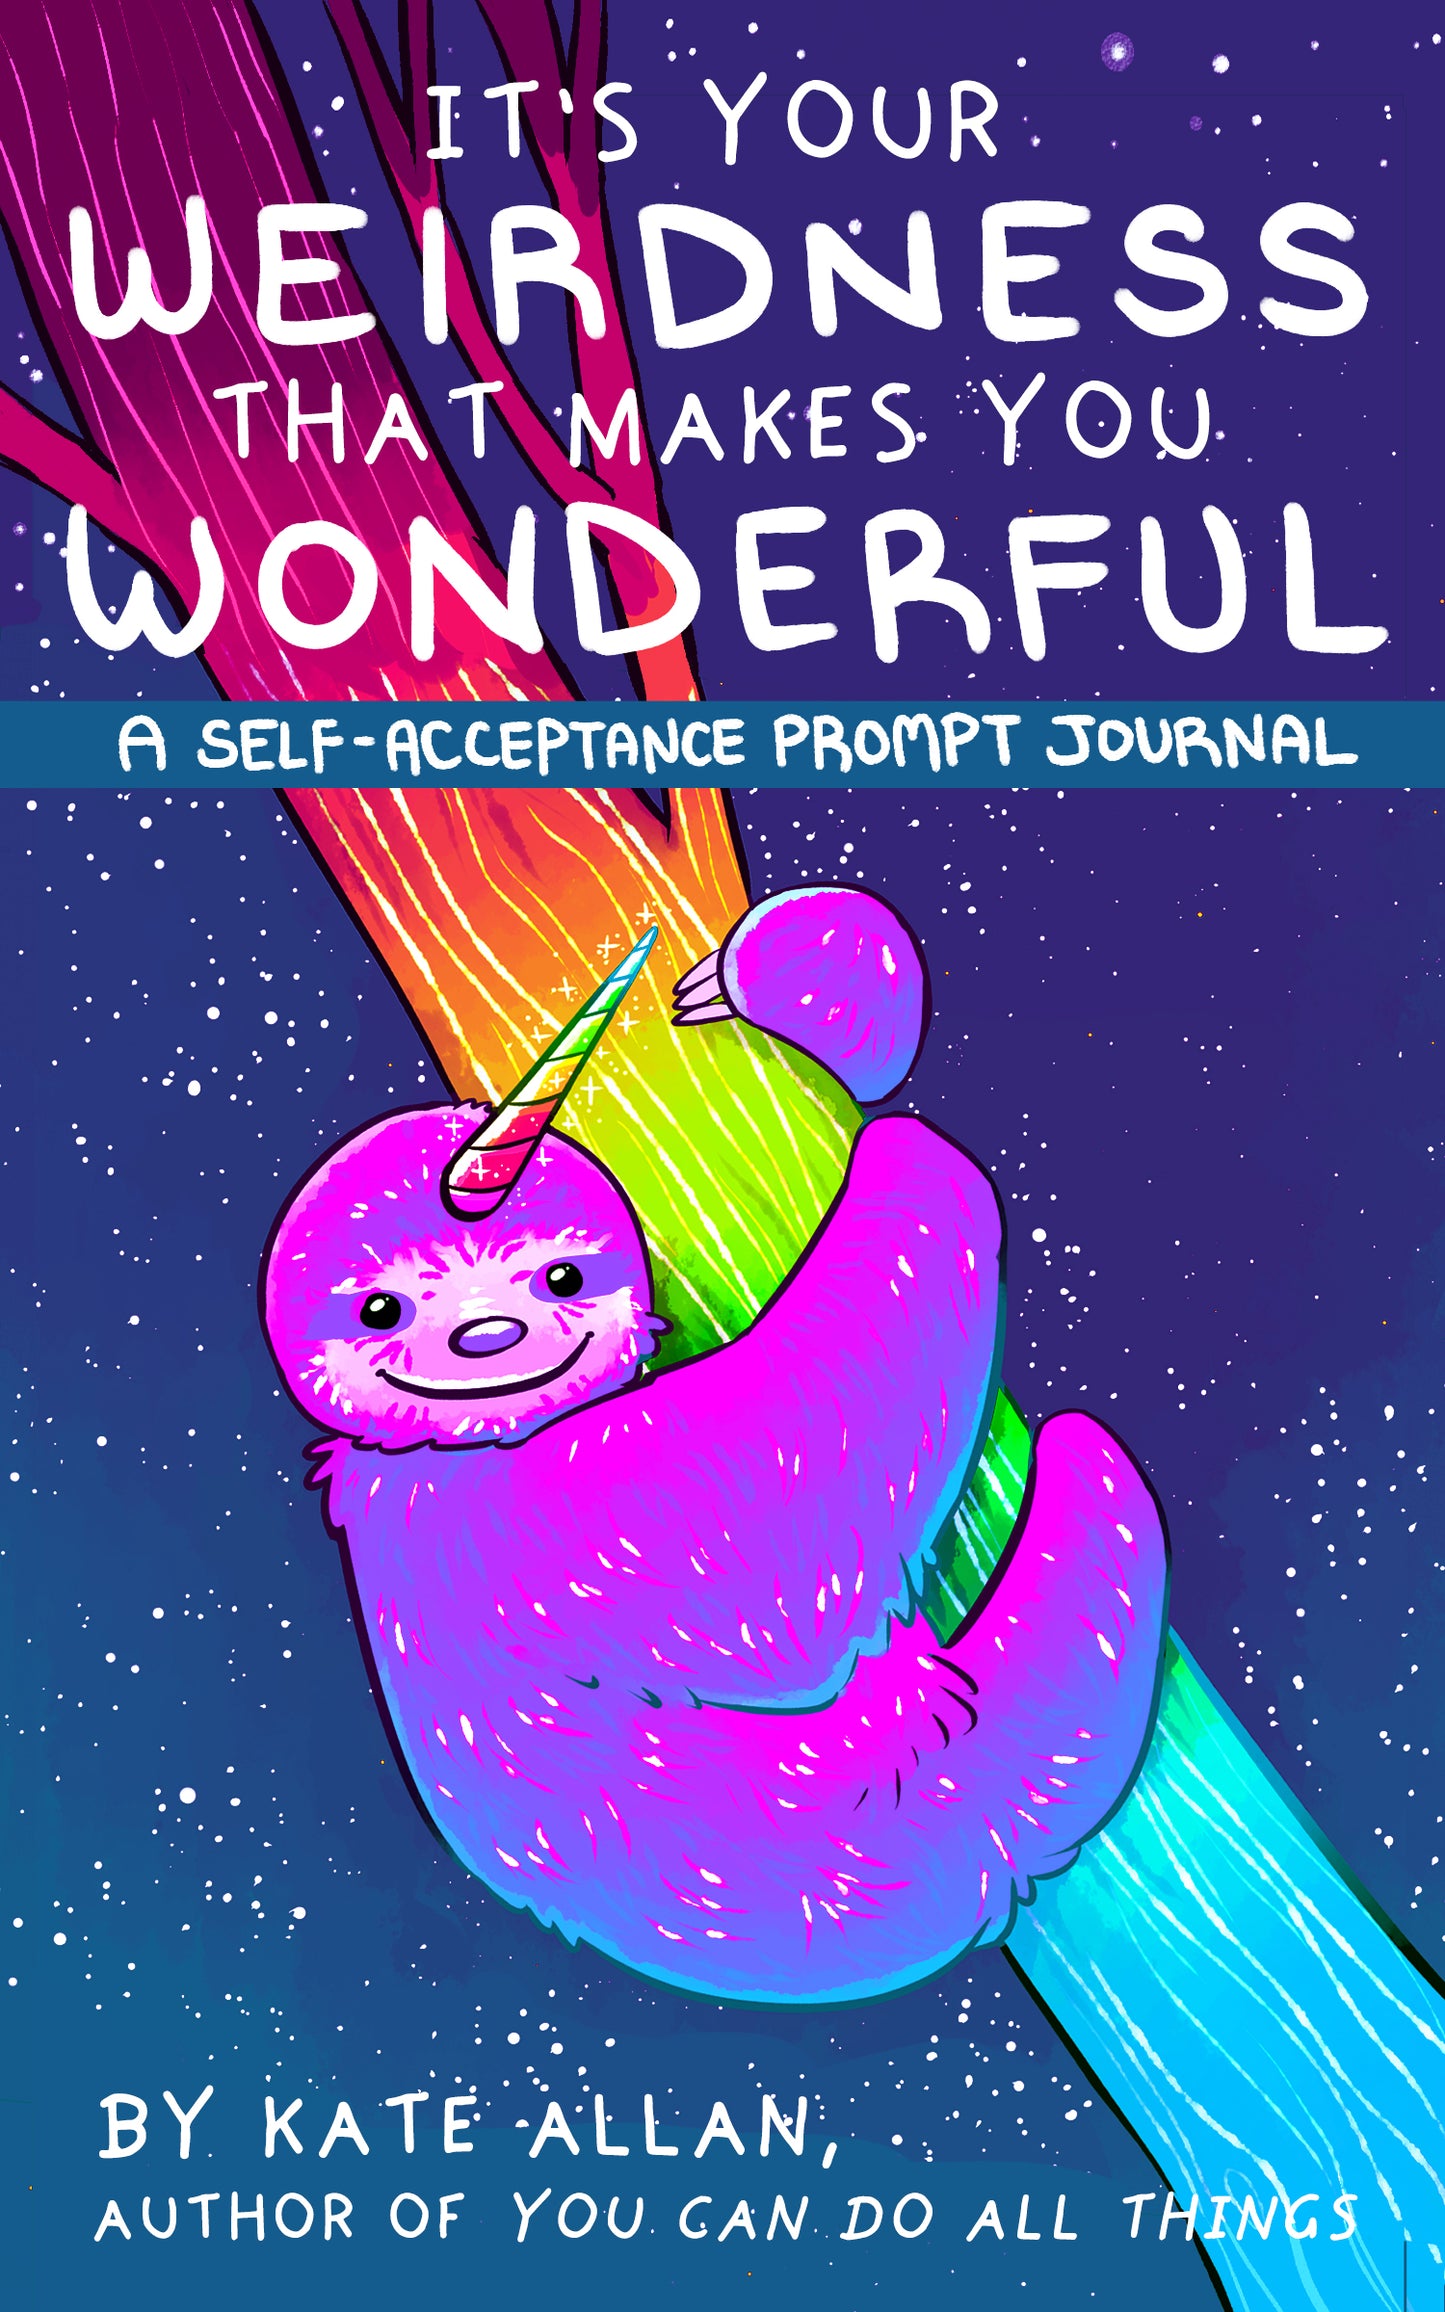 It’s Your Weirdness that Makes You Wonderful: A Self-Acceptance Prompt Journal (Positive Mental Health Teen Journal) (TheLatestKate) by Kate Allan